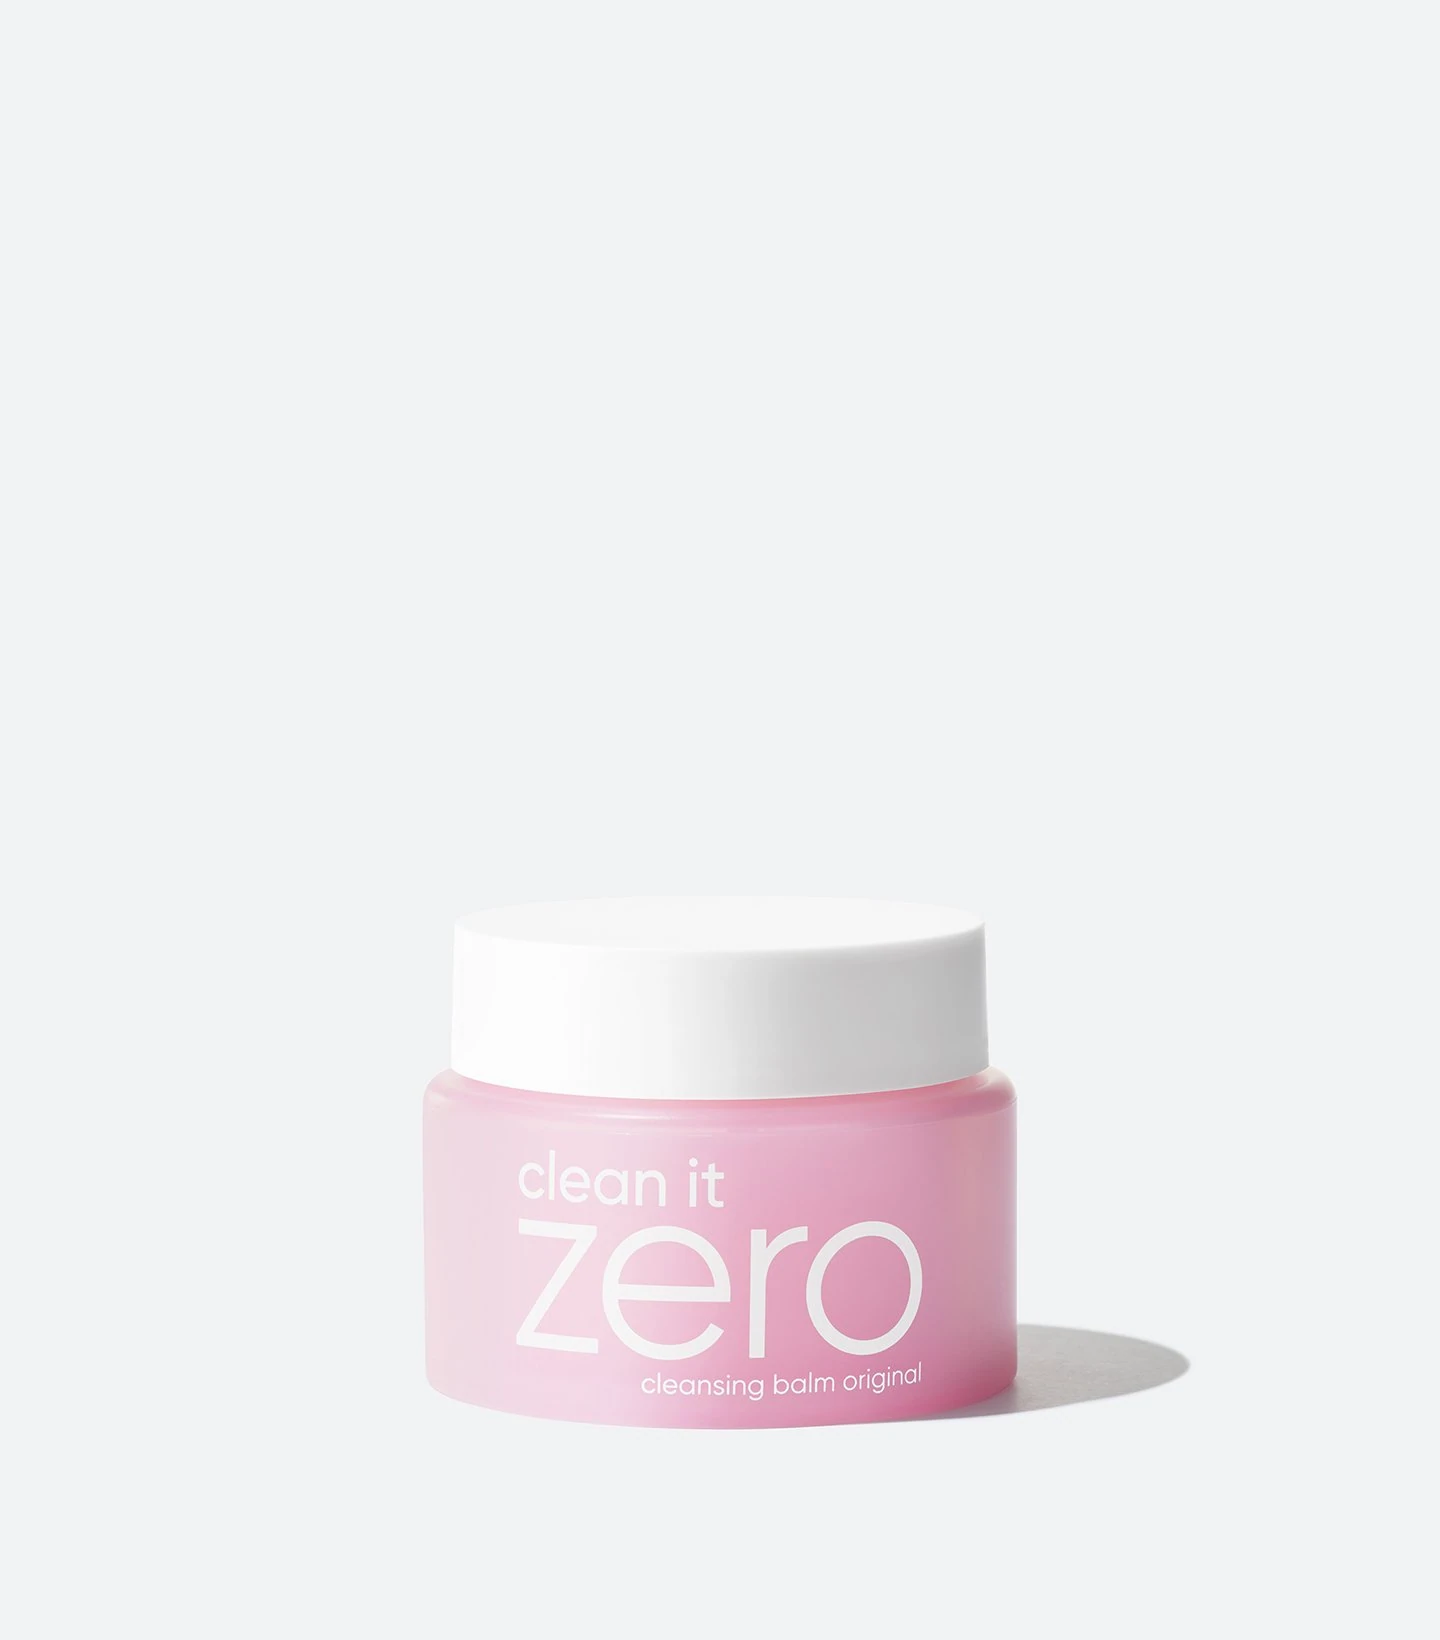 Hyped Skin-Care Makeup Products | 11 Must-Buy Items Banila Co. Clean It Zero Cleansing Balm 100mL Original BNL111001 CLNT 0d302bf5 a2b1 4318 8cbe 4427793172b7+copy